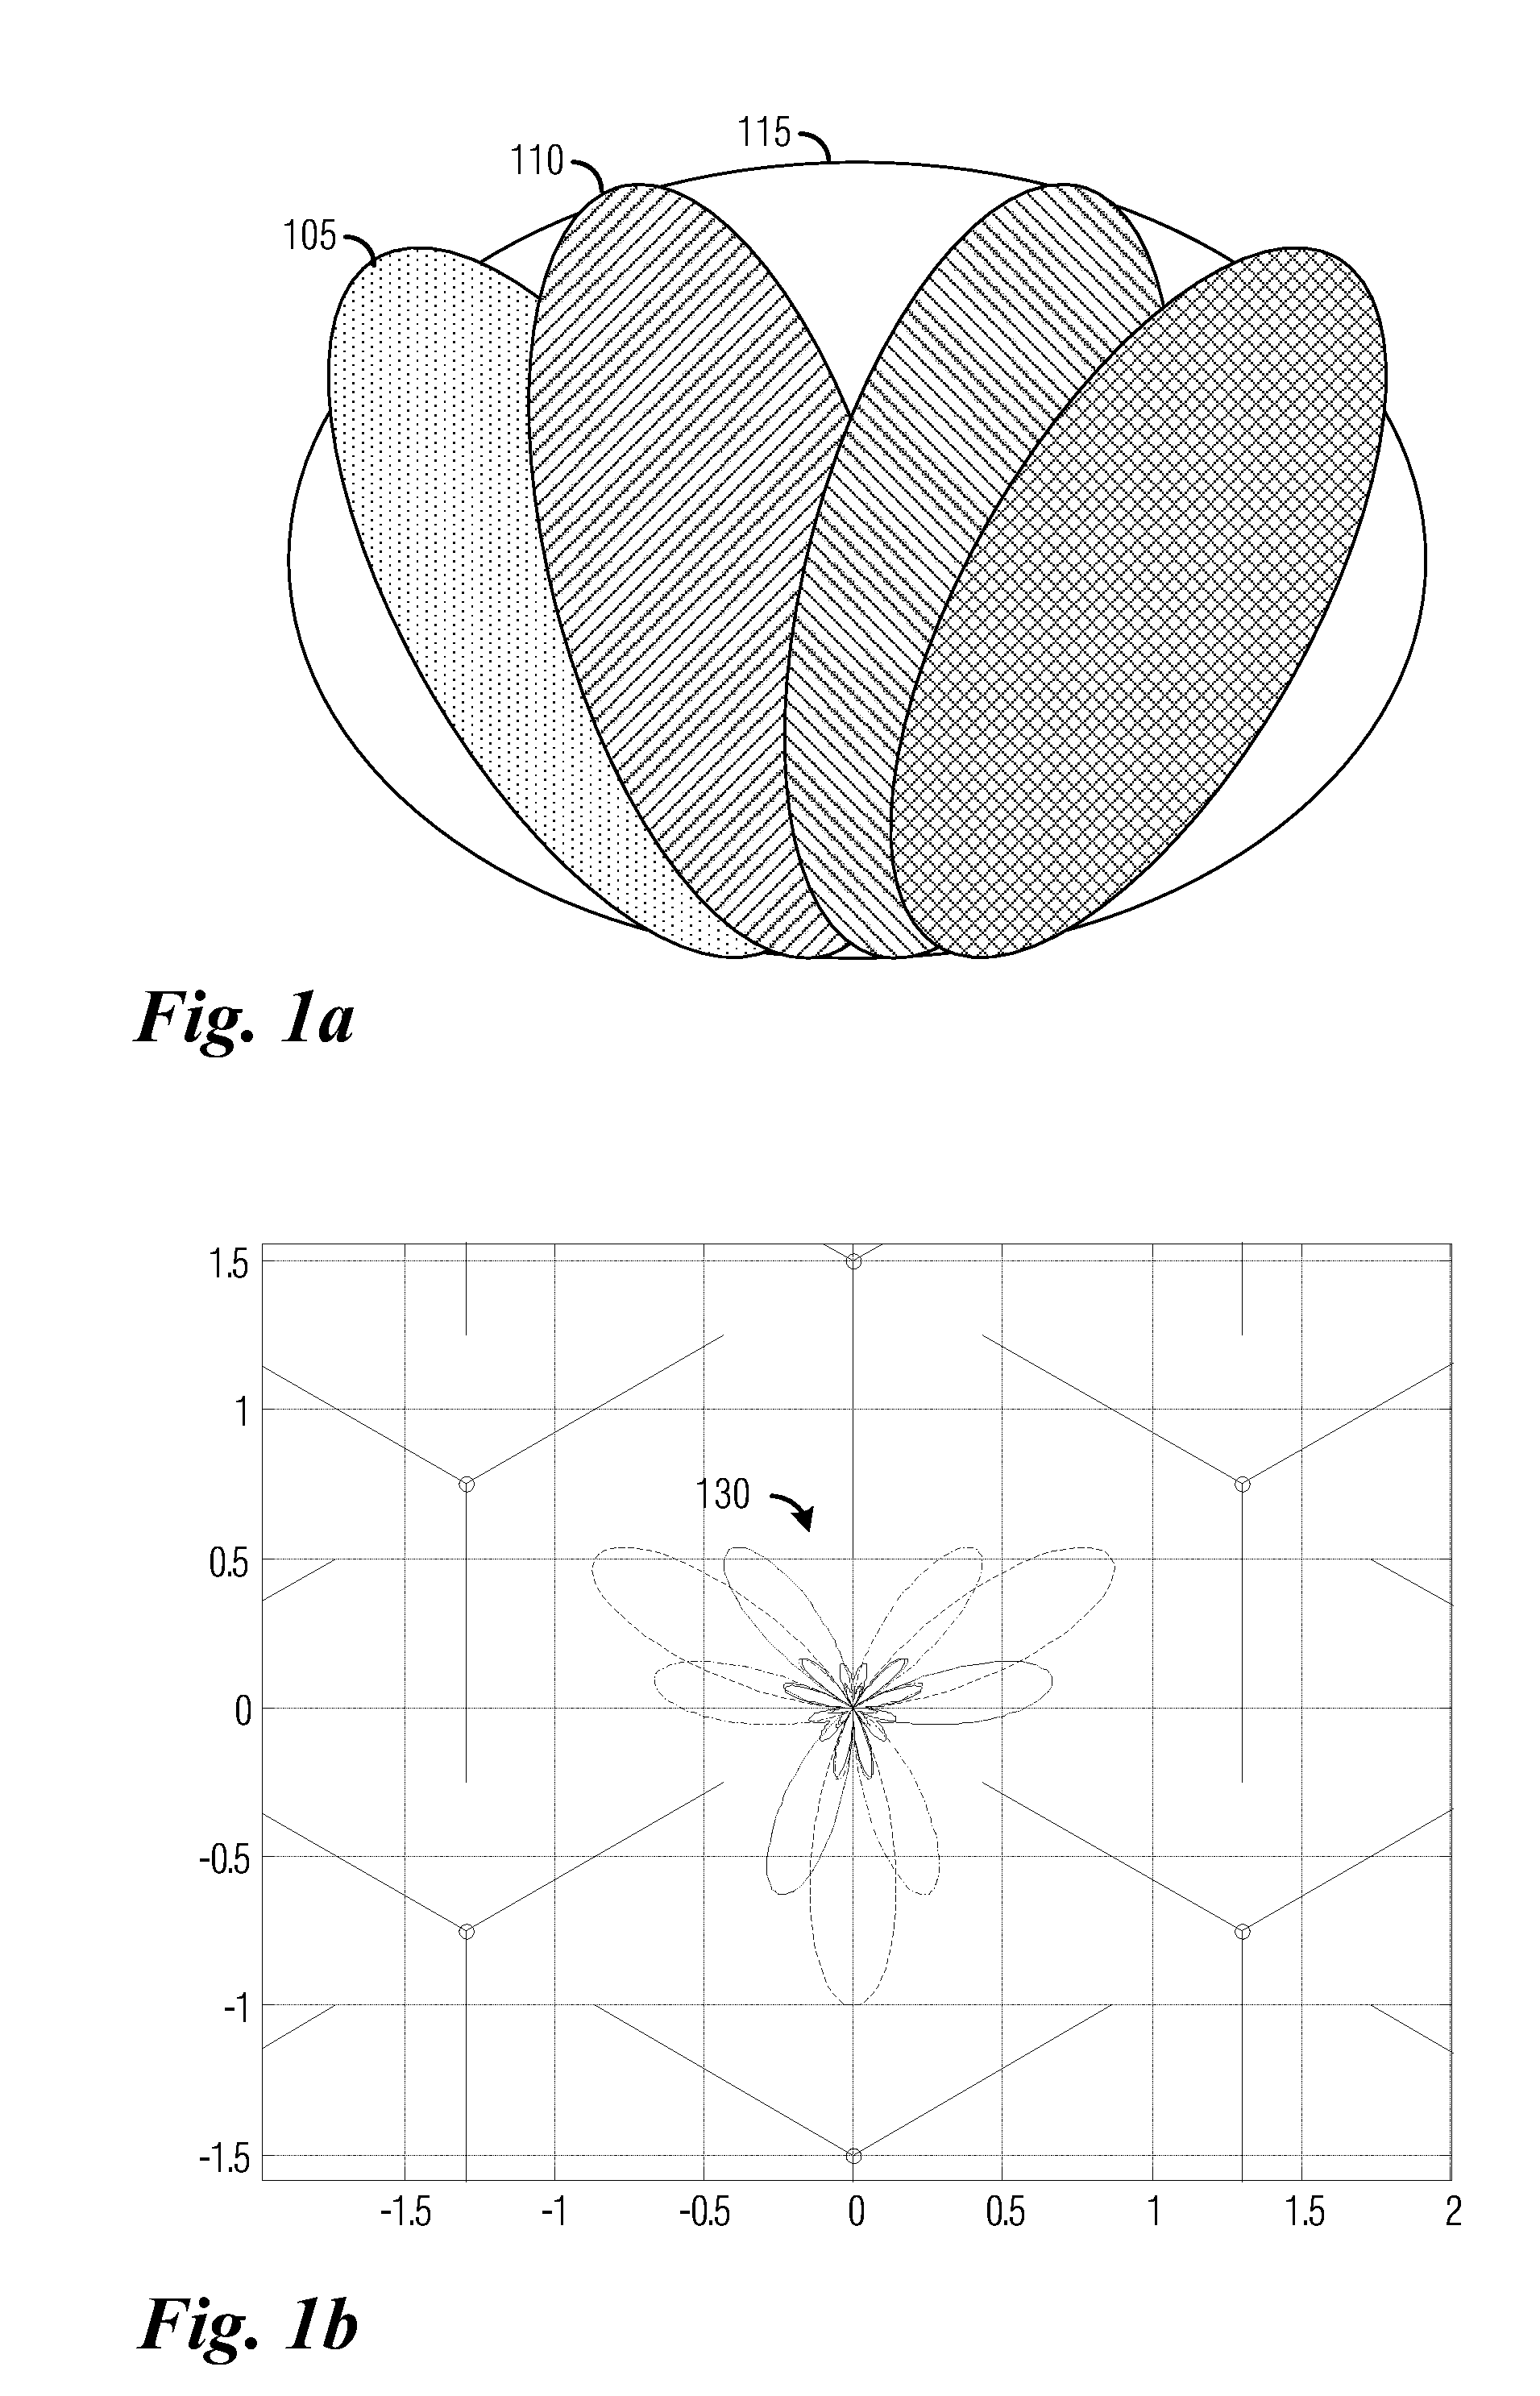 System and Method for Coordinating Electronic Devices in a Wireless Communications System